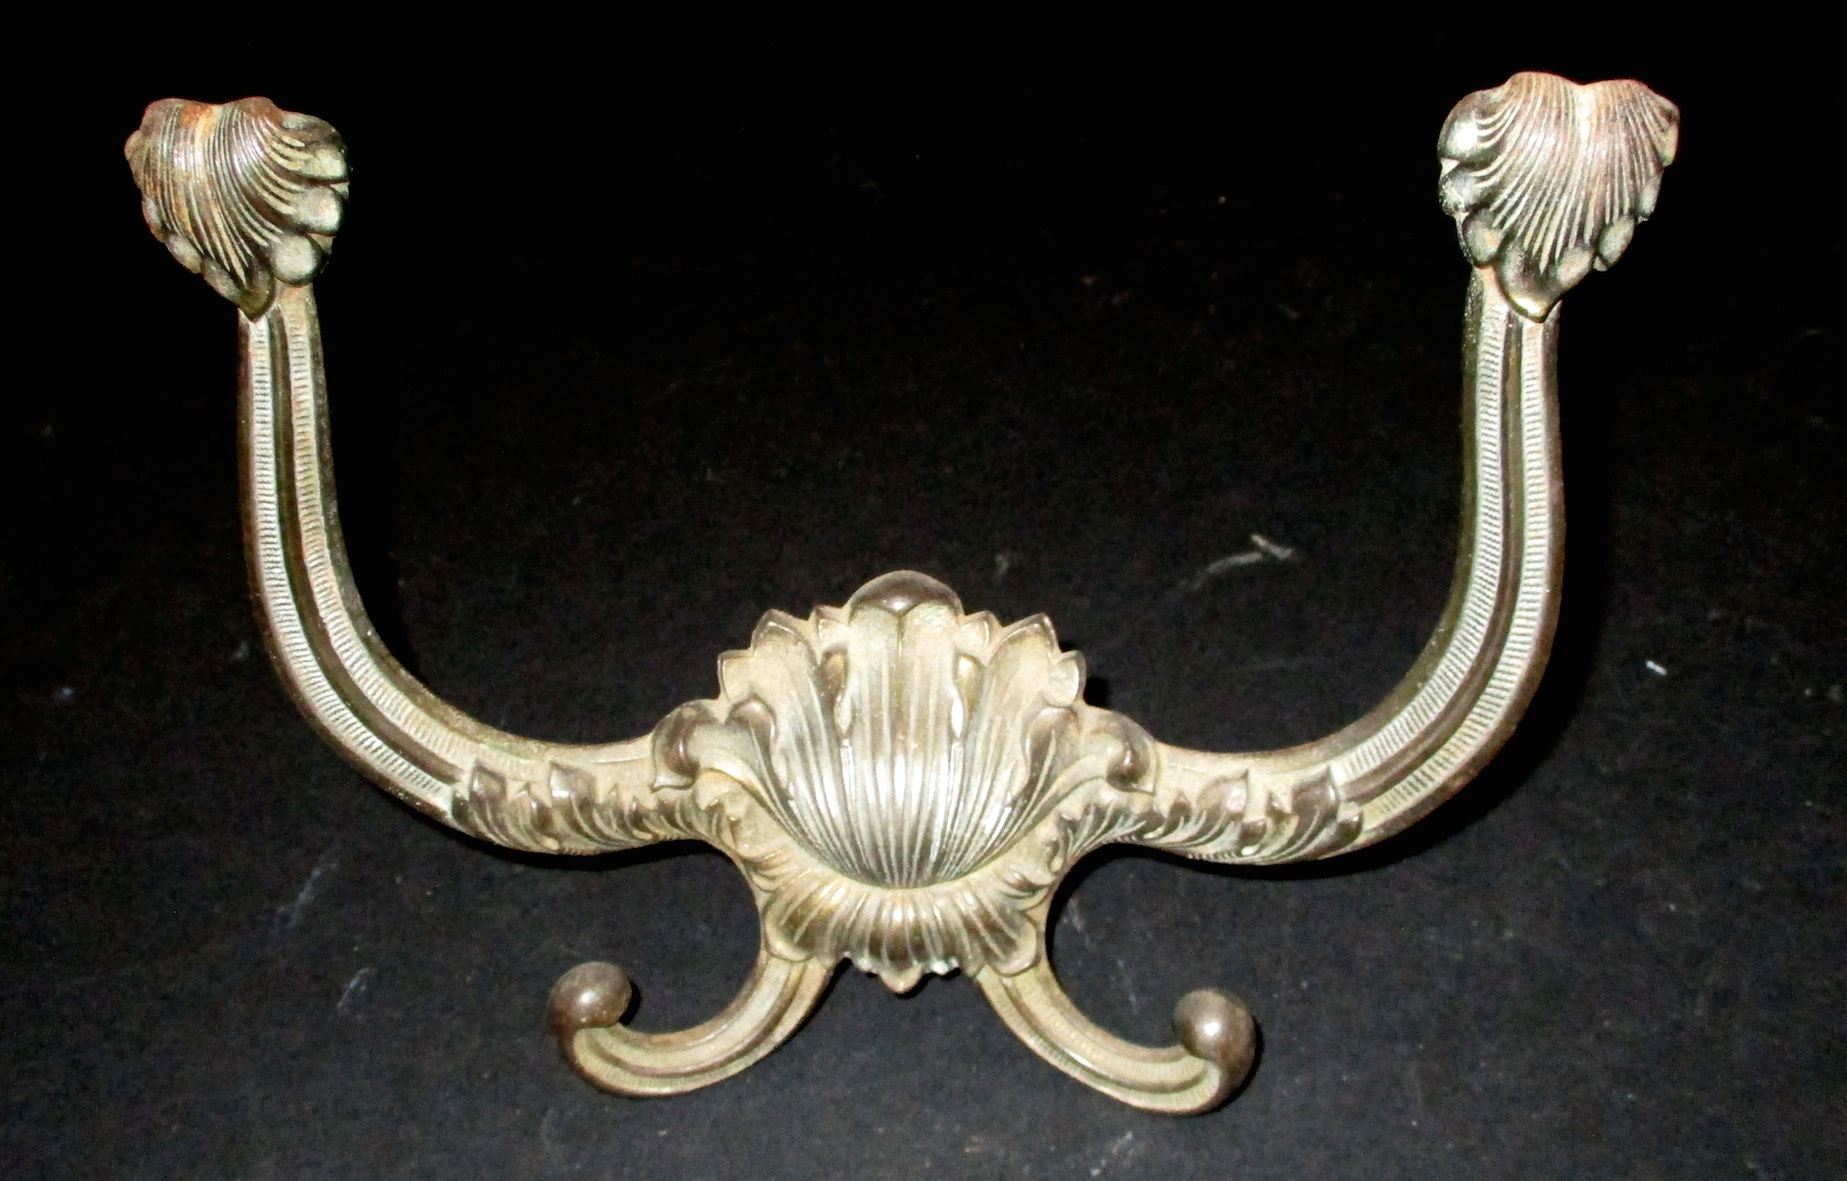 19th Century Brass Plated Iron Coat Hook w/Grotesque Face - 7 3/4" W x 6" H x 2 1/2"" D)